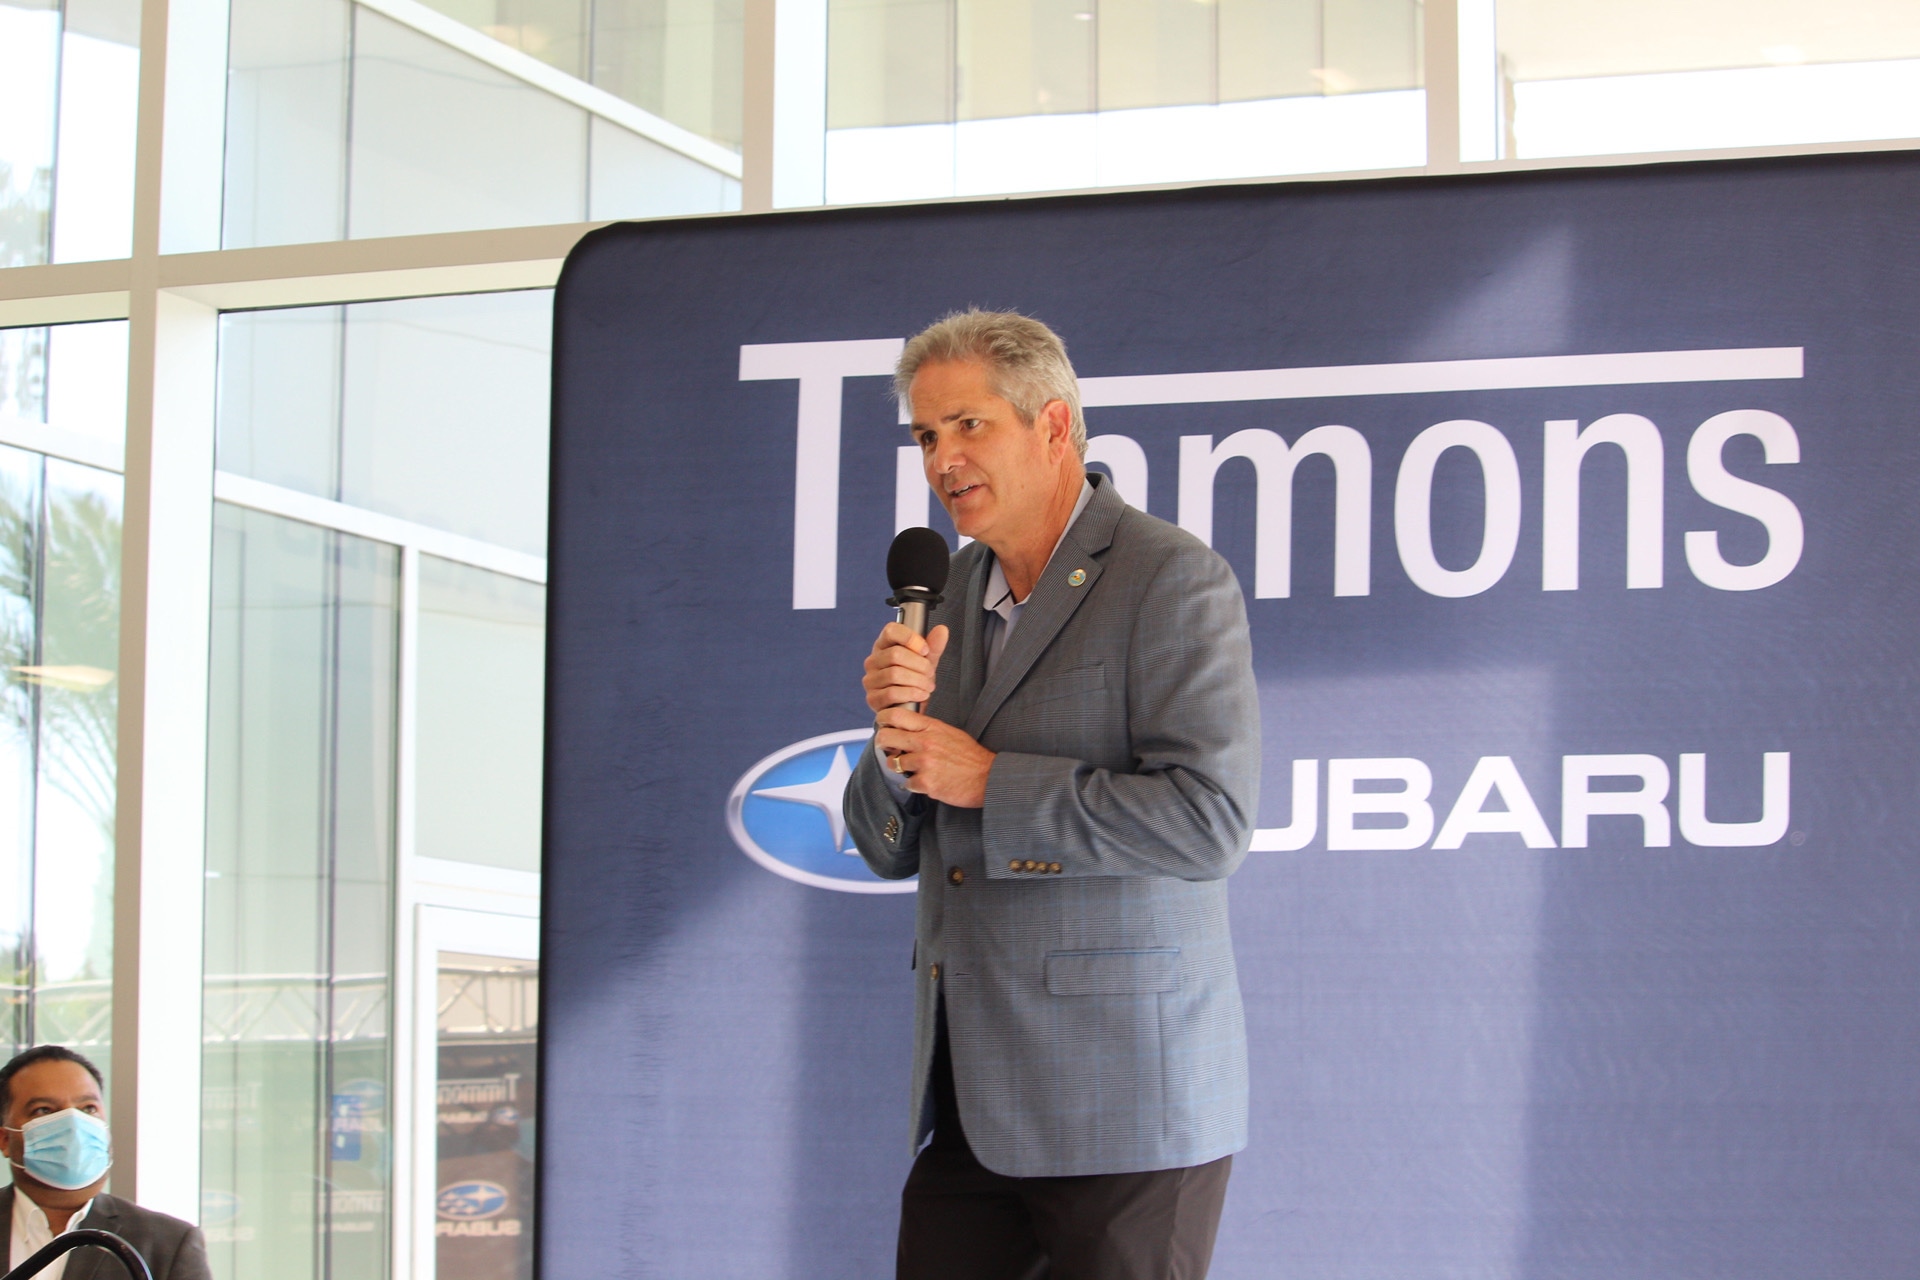 Lakewood Mayor Jeff Wood at the all new Timmons Subaru Grand Opening Ribbon Cutting Event